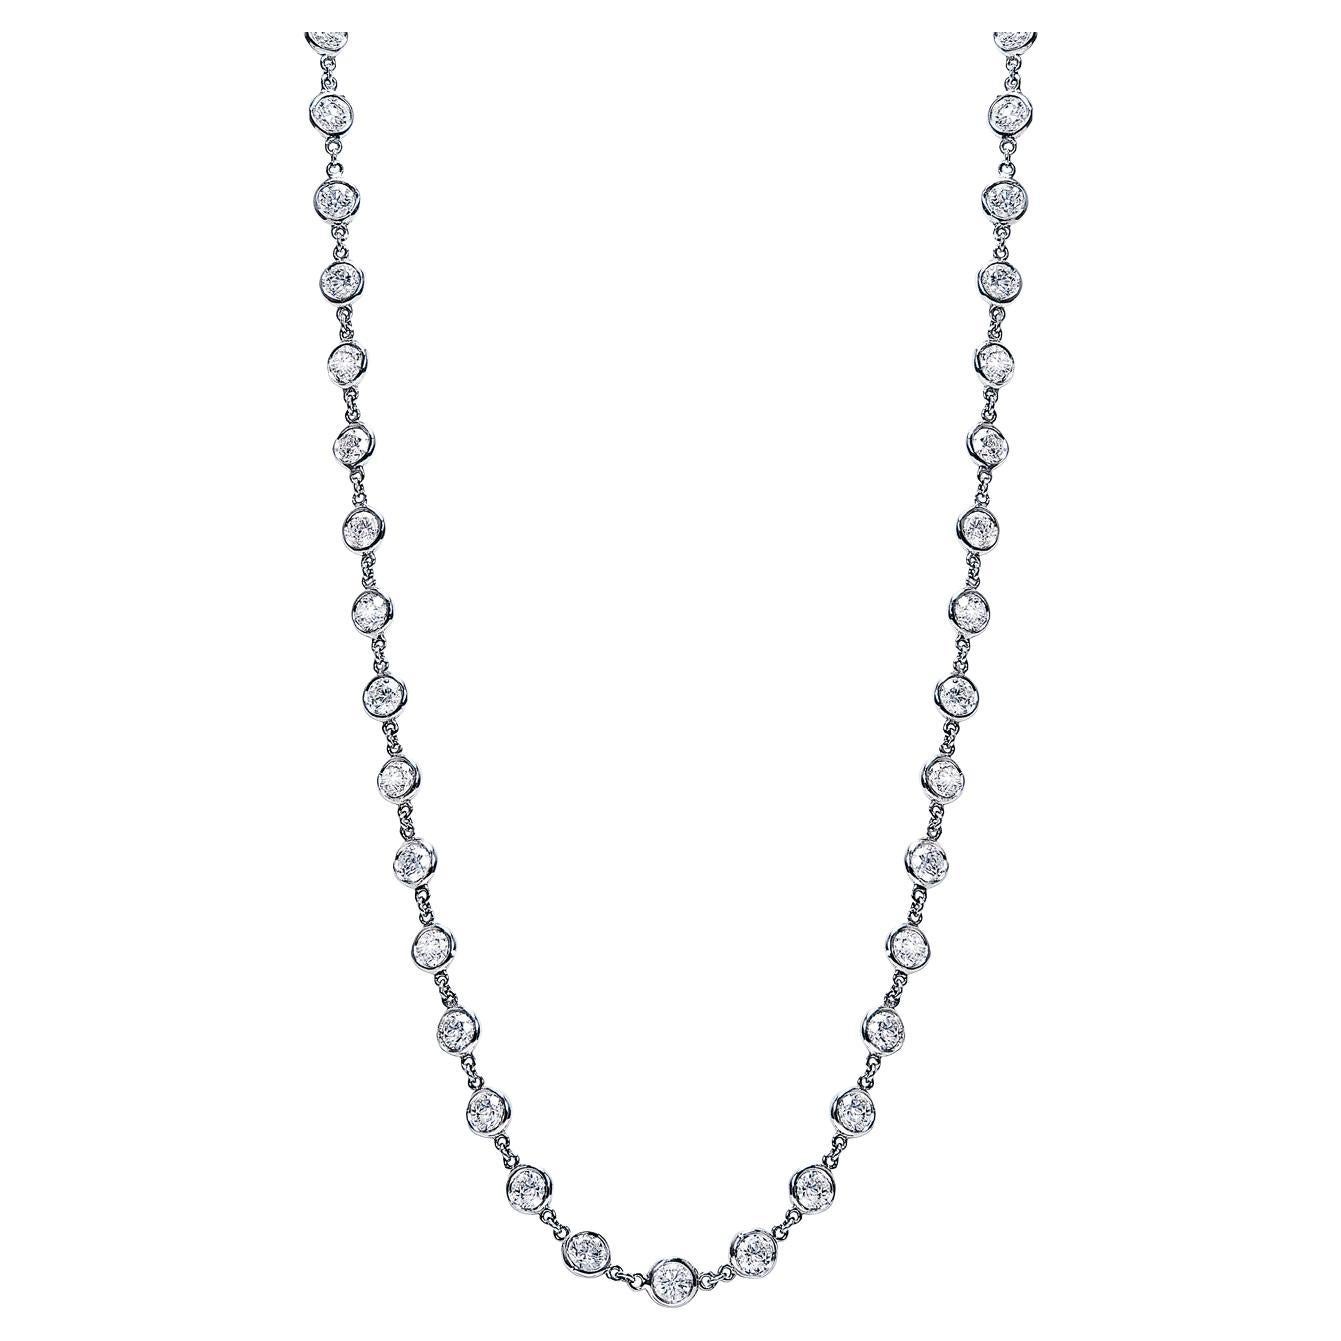 12 Carat Round Brilliant Diamonds By The Yard Necklace Certified